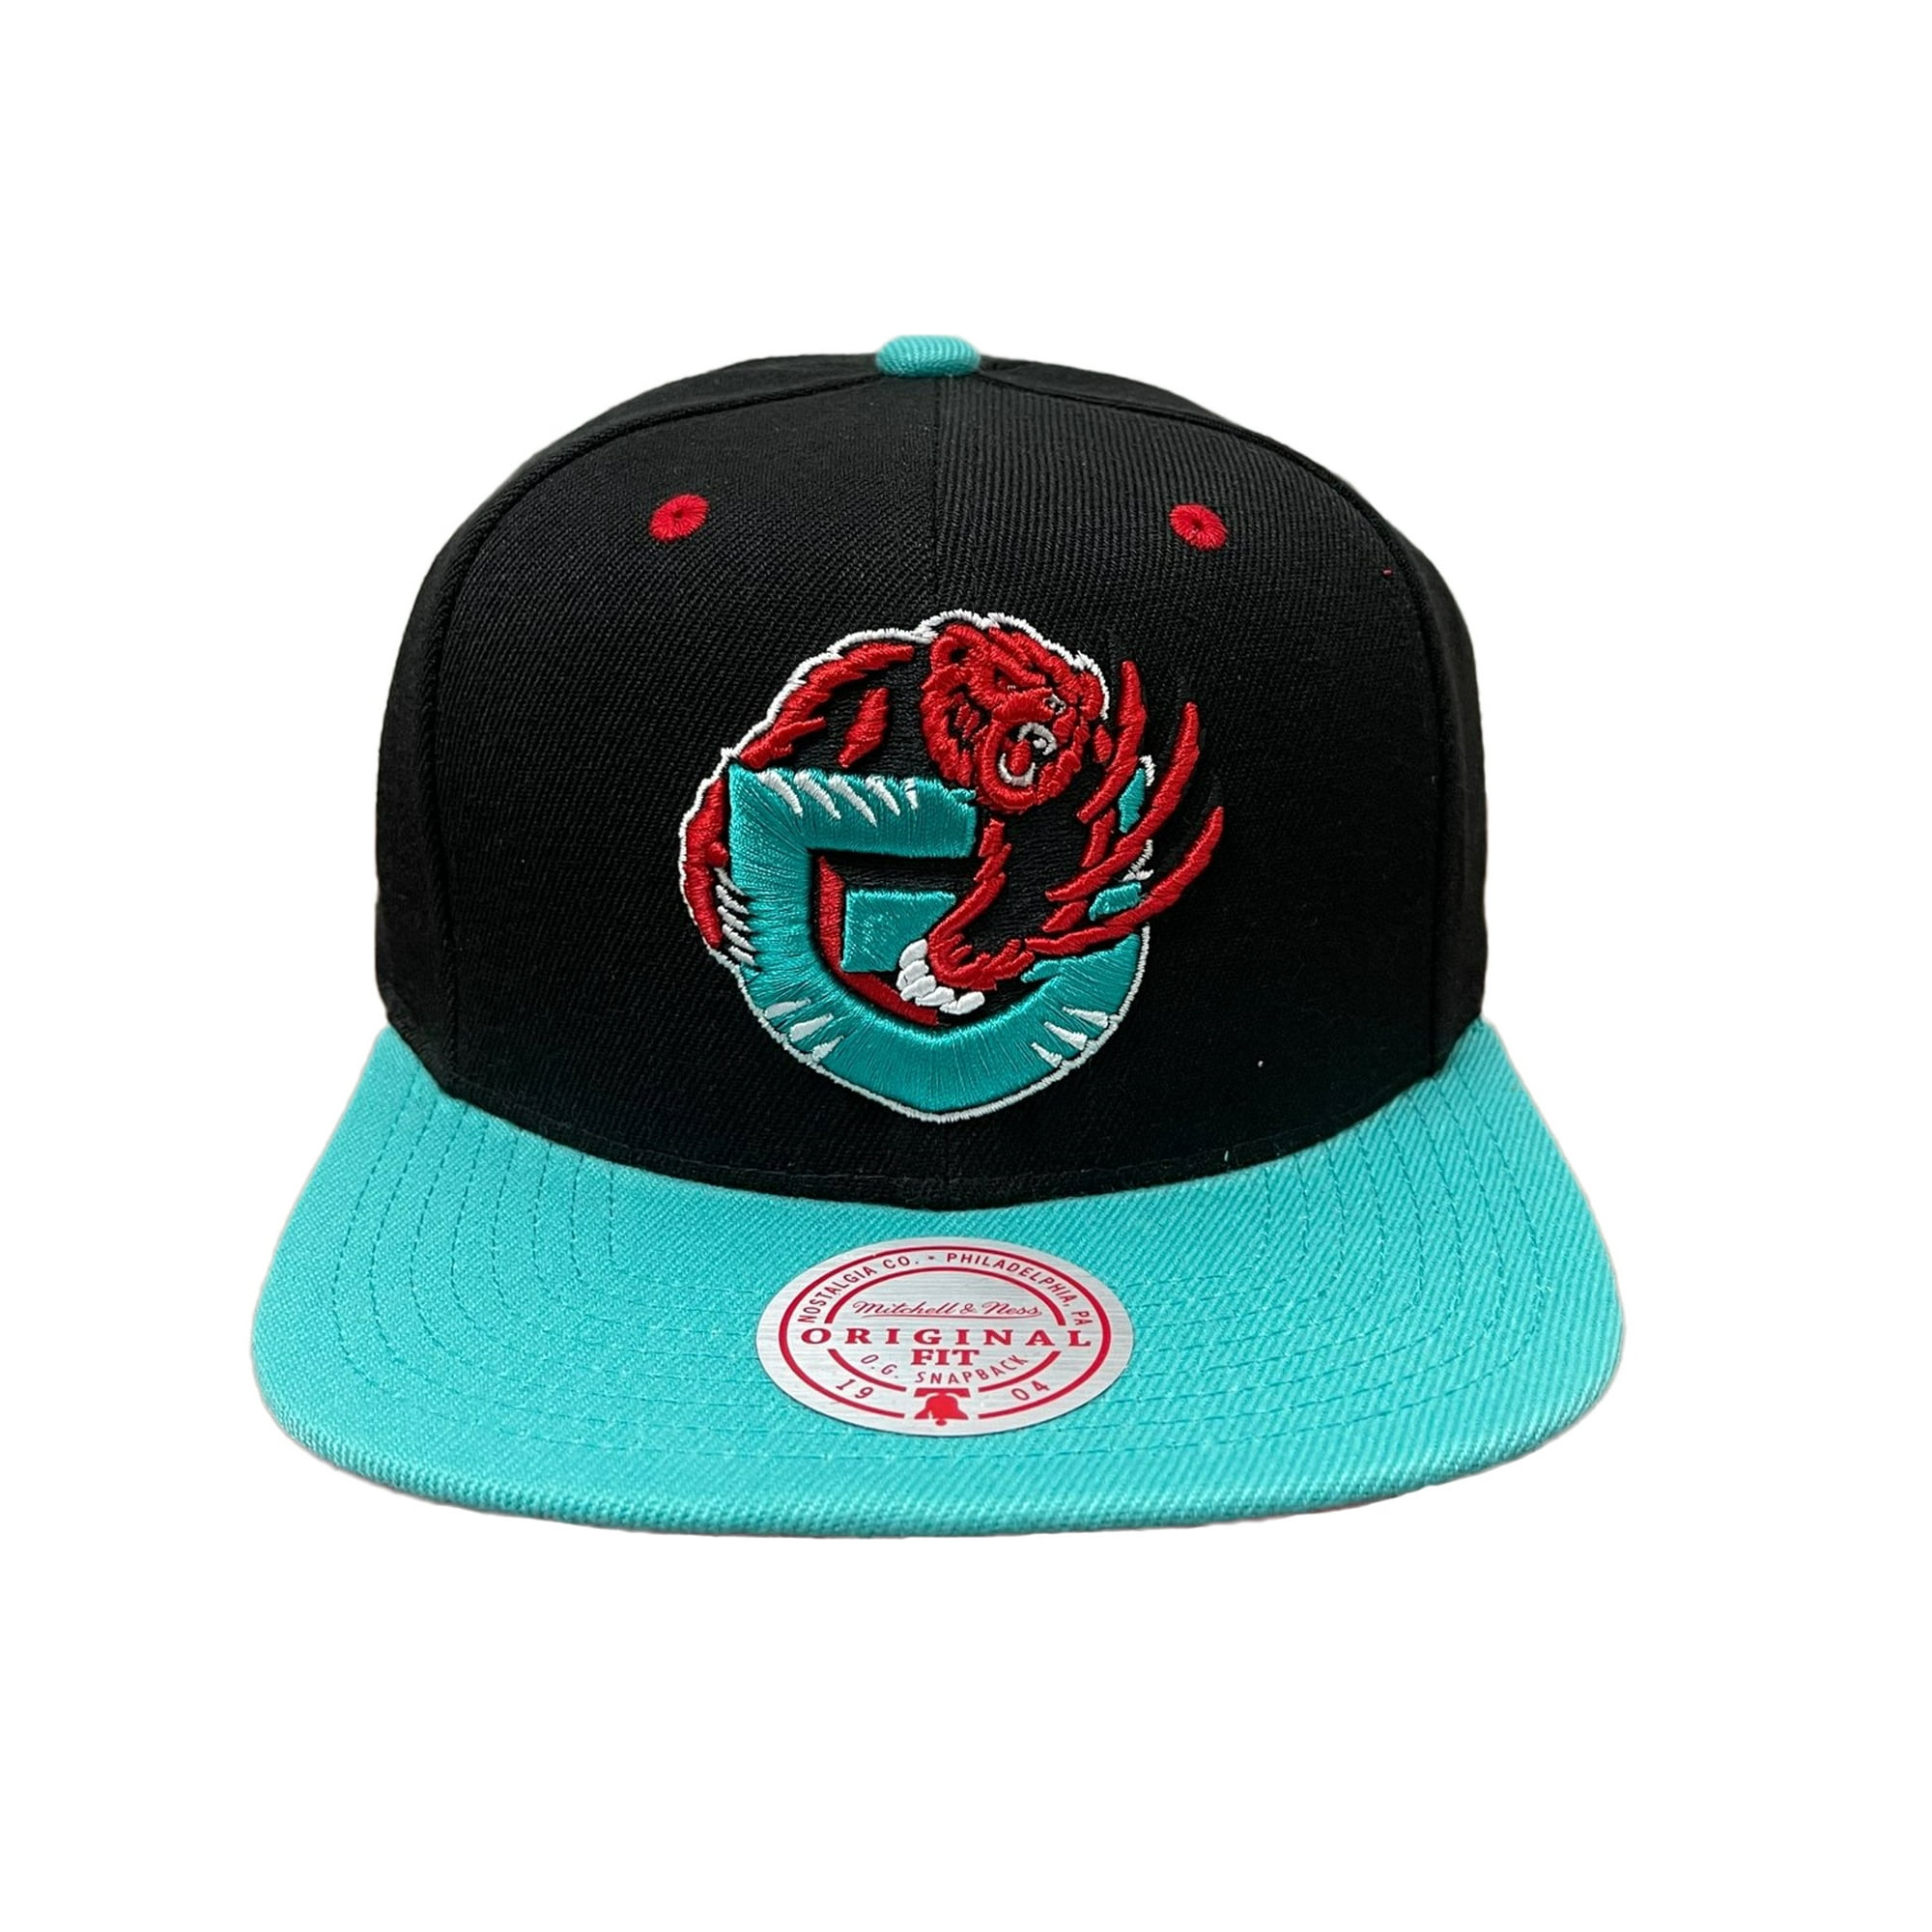 VANCOUVER GRIZZLIES NBA EMBROIDERED PATCH